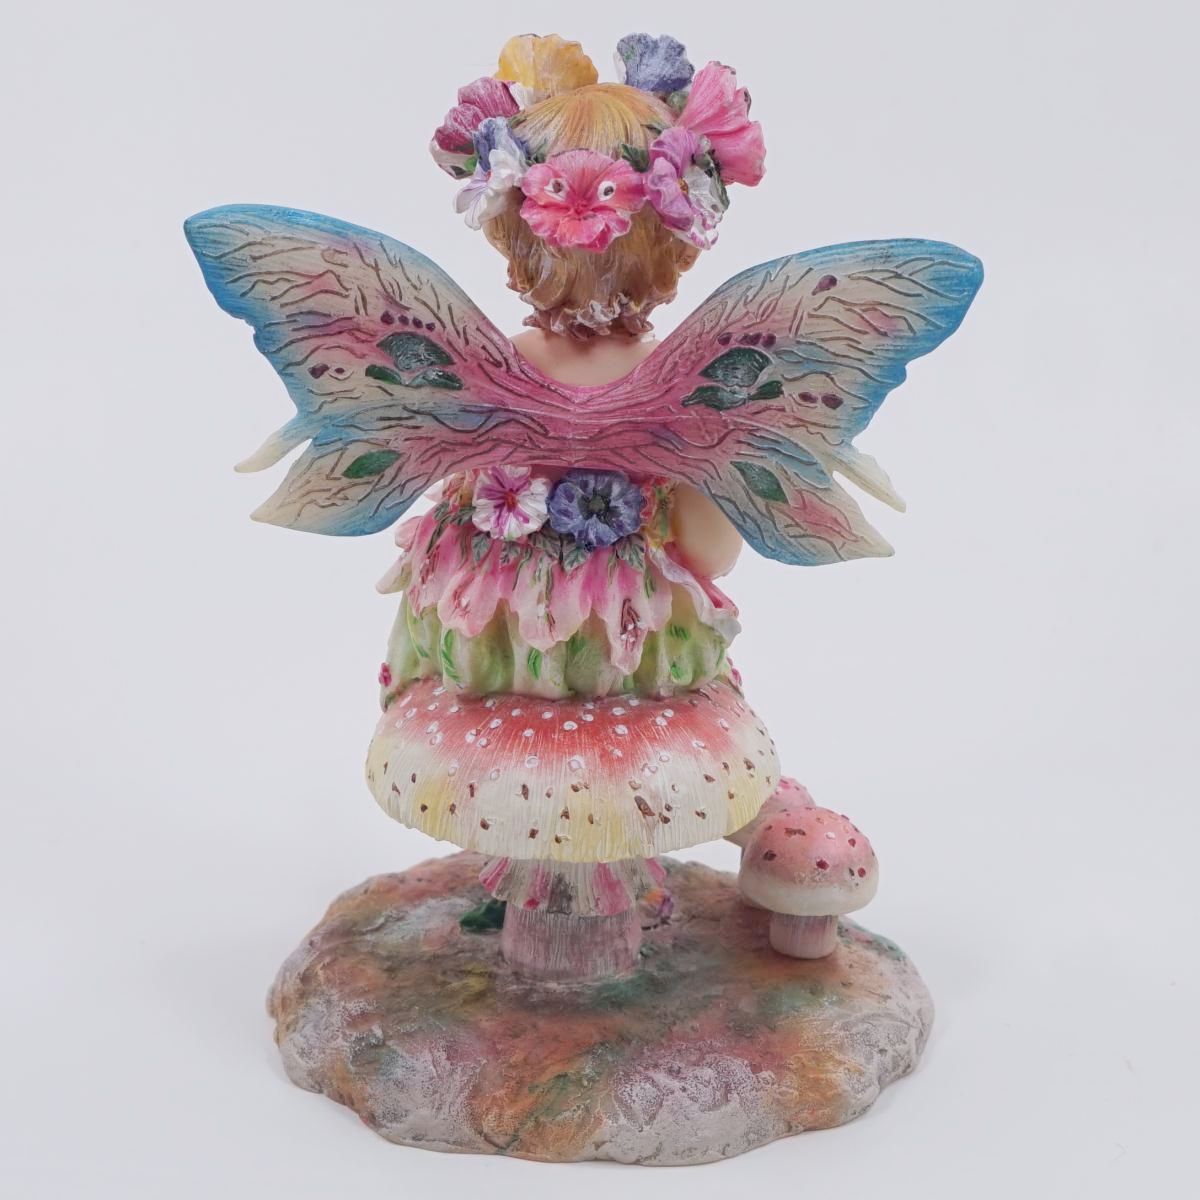 Crisalis collection ★★ Tiny Toadstool Faerie (1-898)